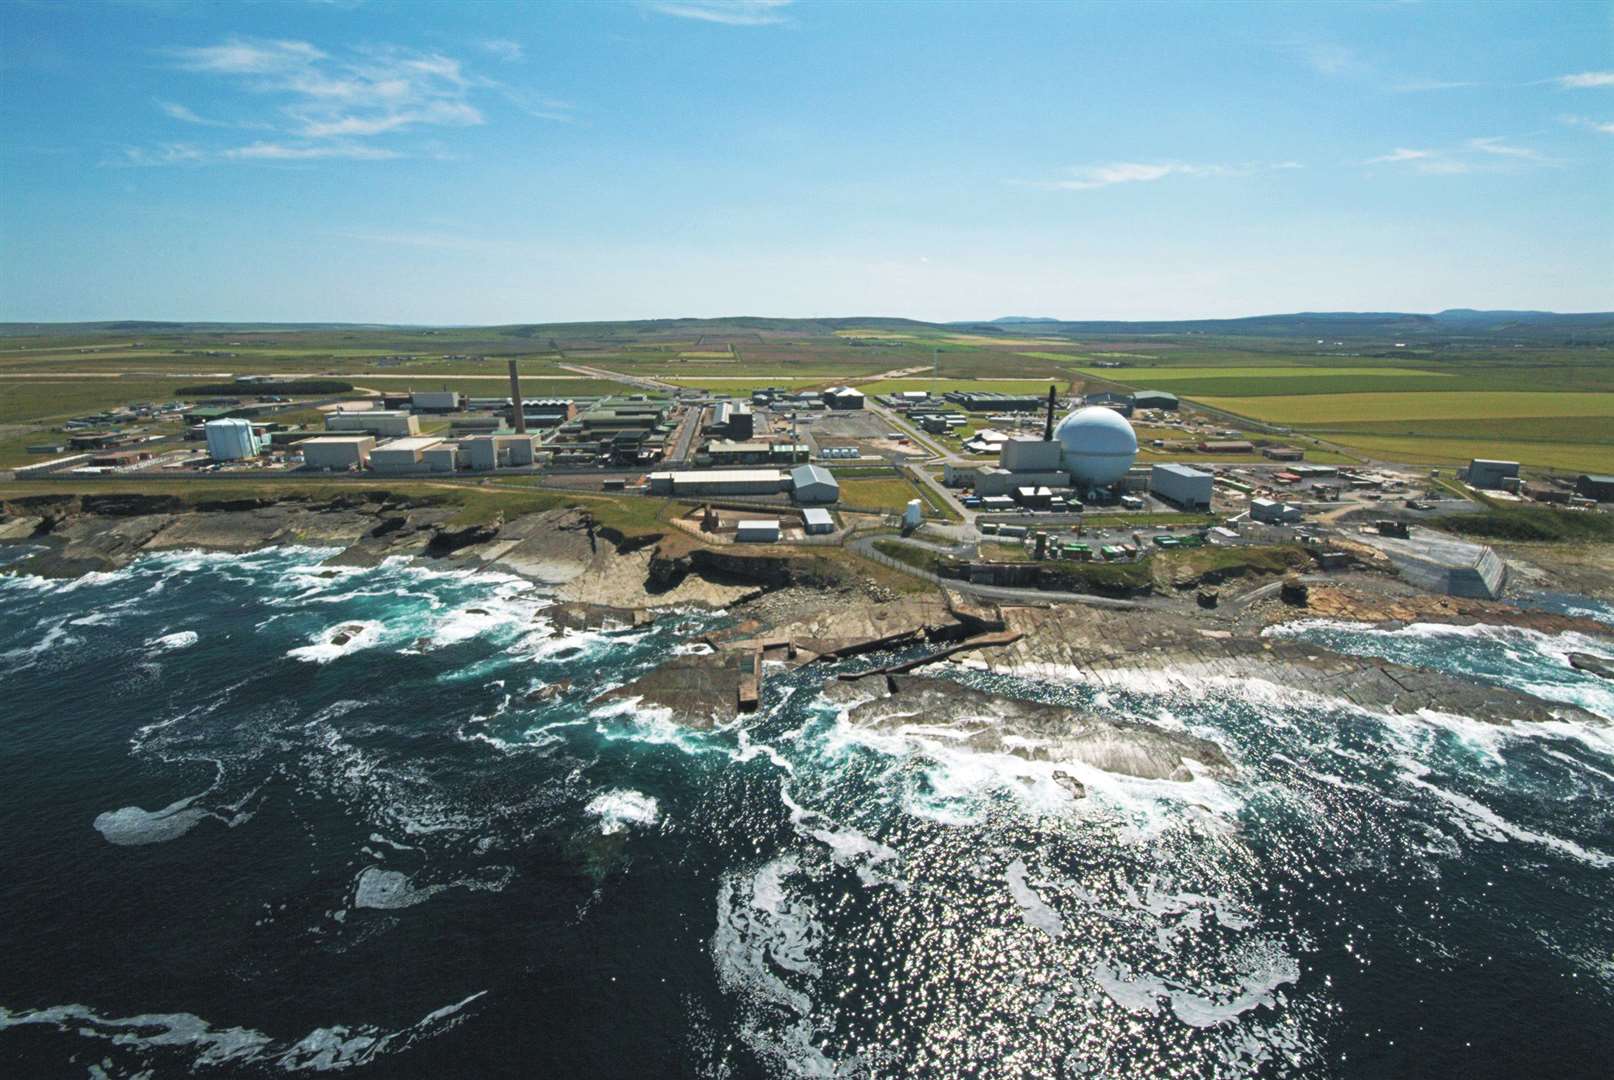 The contract award for Cavendish Nuclear will support the site decommissioning strategy at Dounreay.